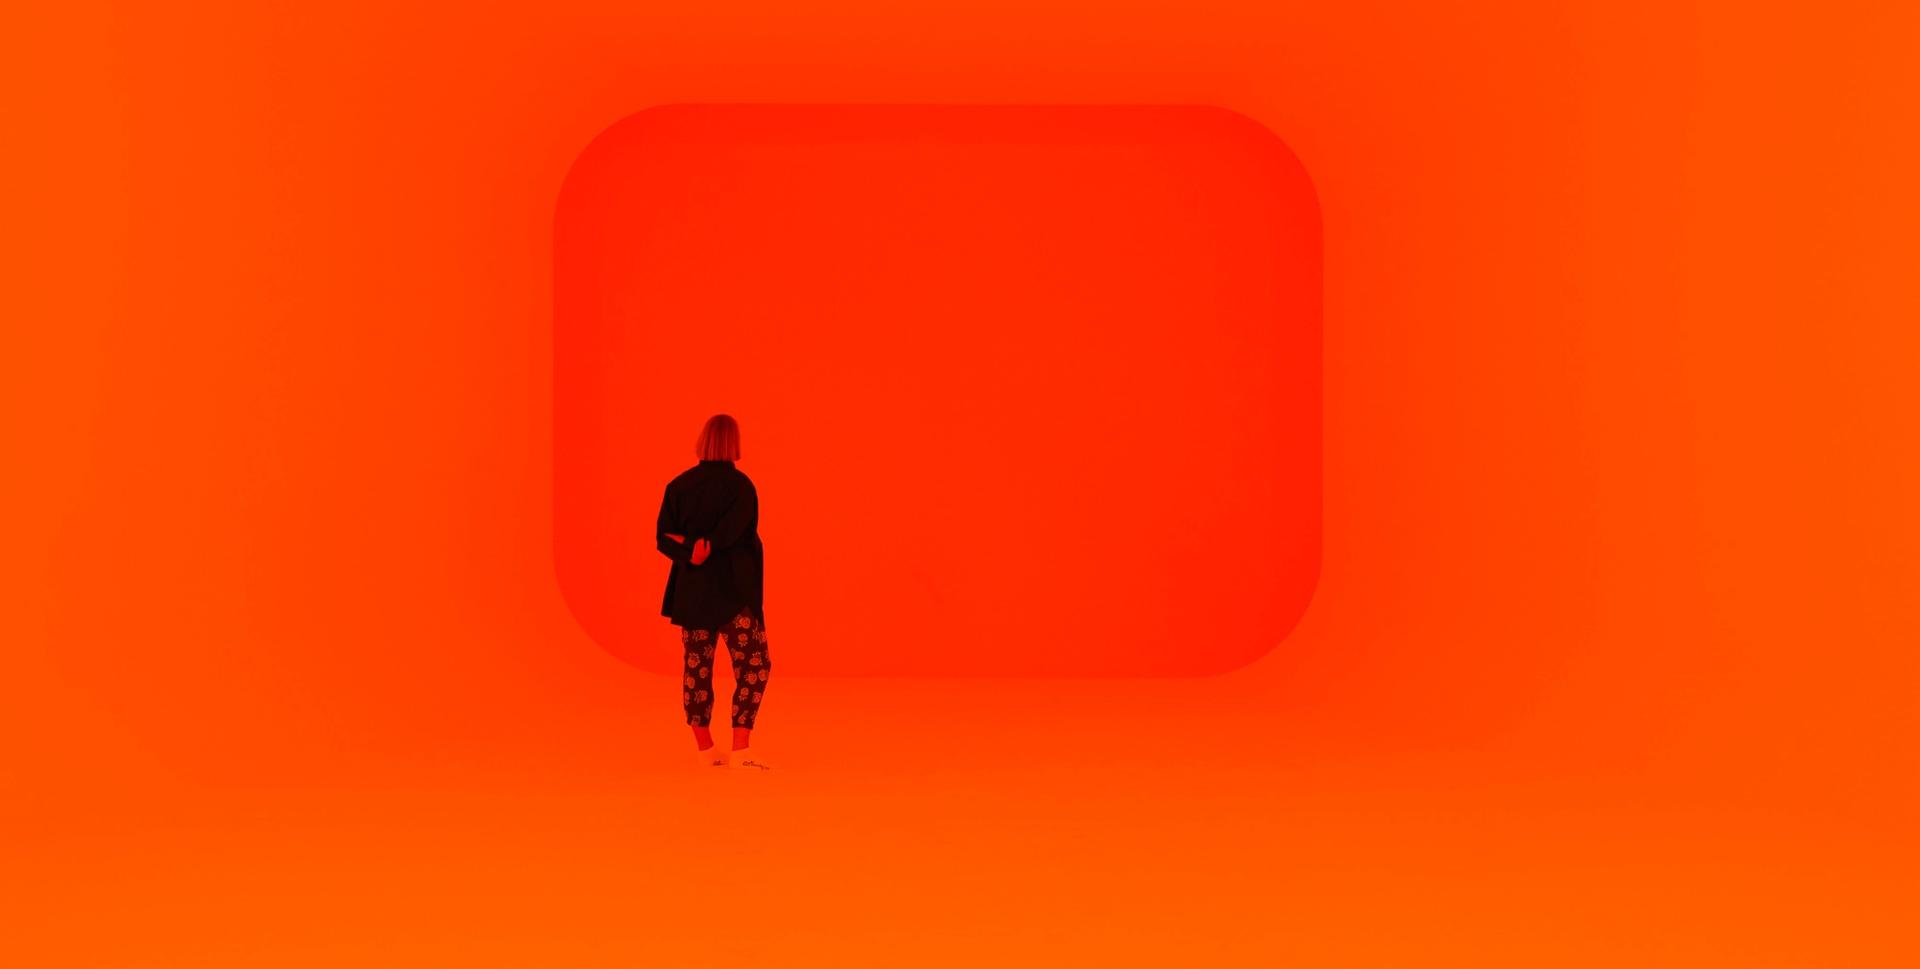 James Turrell’s Event Horizon (2017) MONA/Jesse Hunniford; courtesy of MONA, Museum of Old and New Art